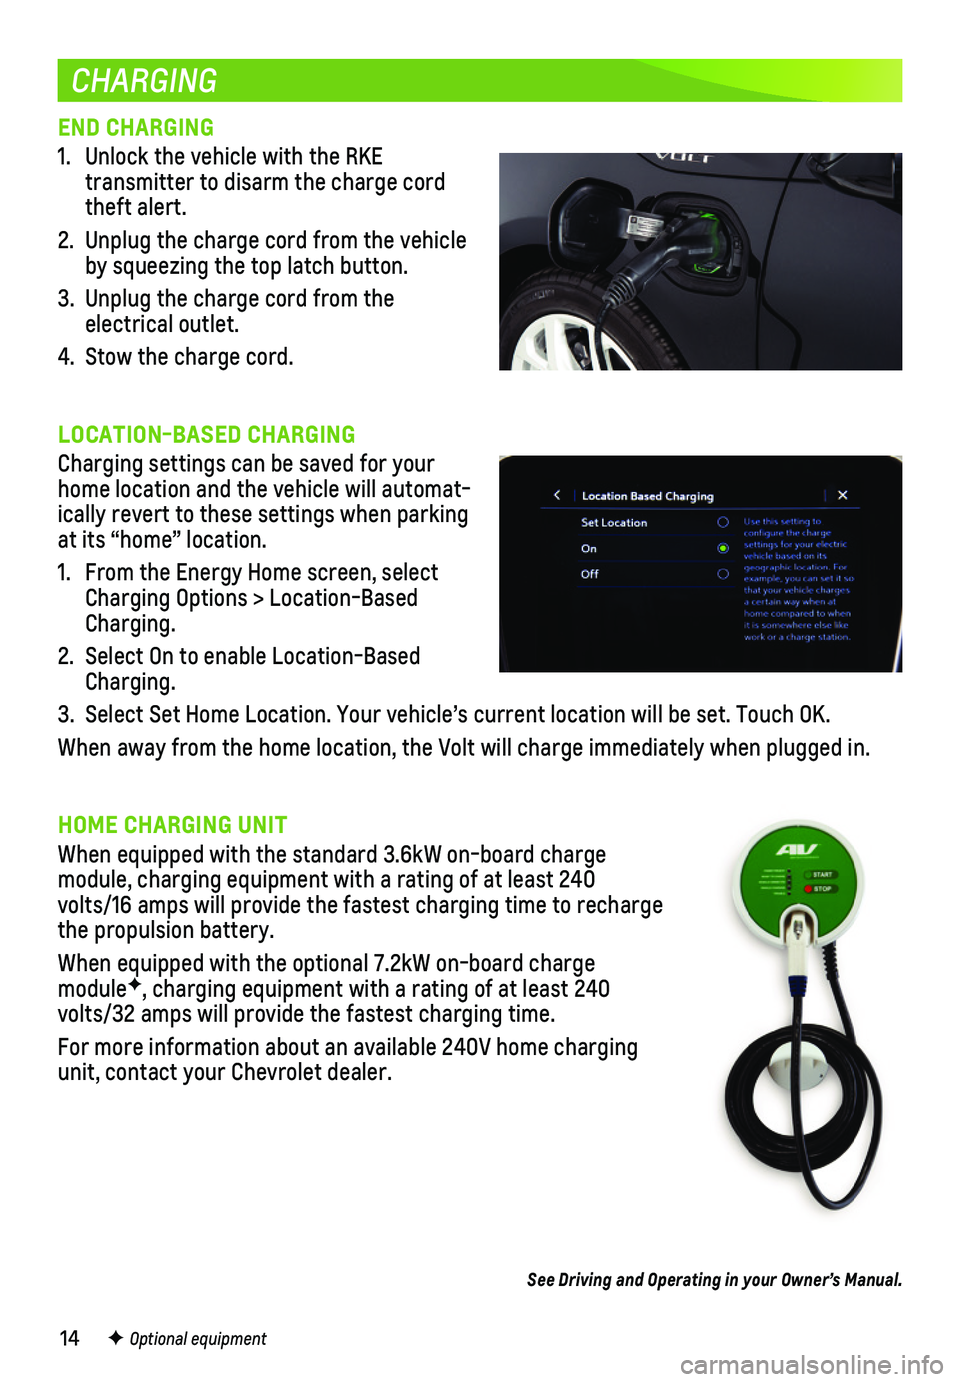 CHEVROLET VOLT 2019  Get To Know Guide 14
CHARGING
END CHARGING
1. Unlock the vehicle with the RKE  
transmitter to disarm the charge cord theft alert.
2. Unplug the charge cord from the vehicle by squeezing the top latch button.
3. Unplug